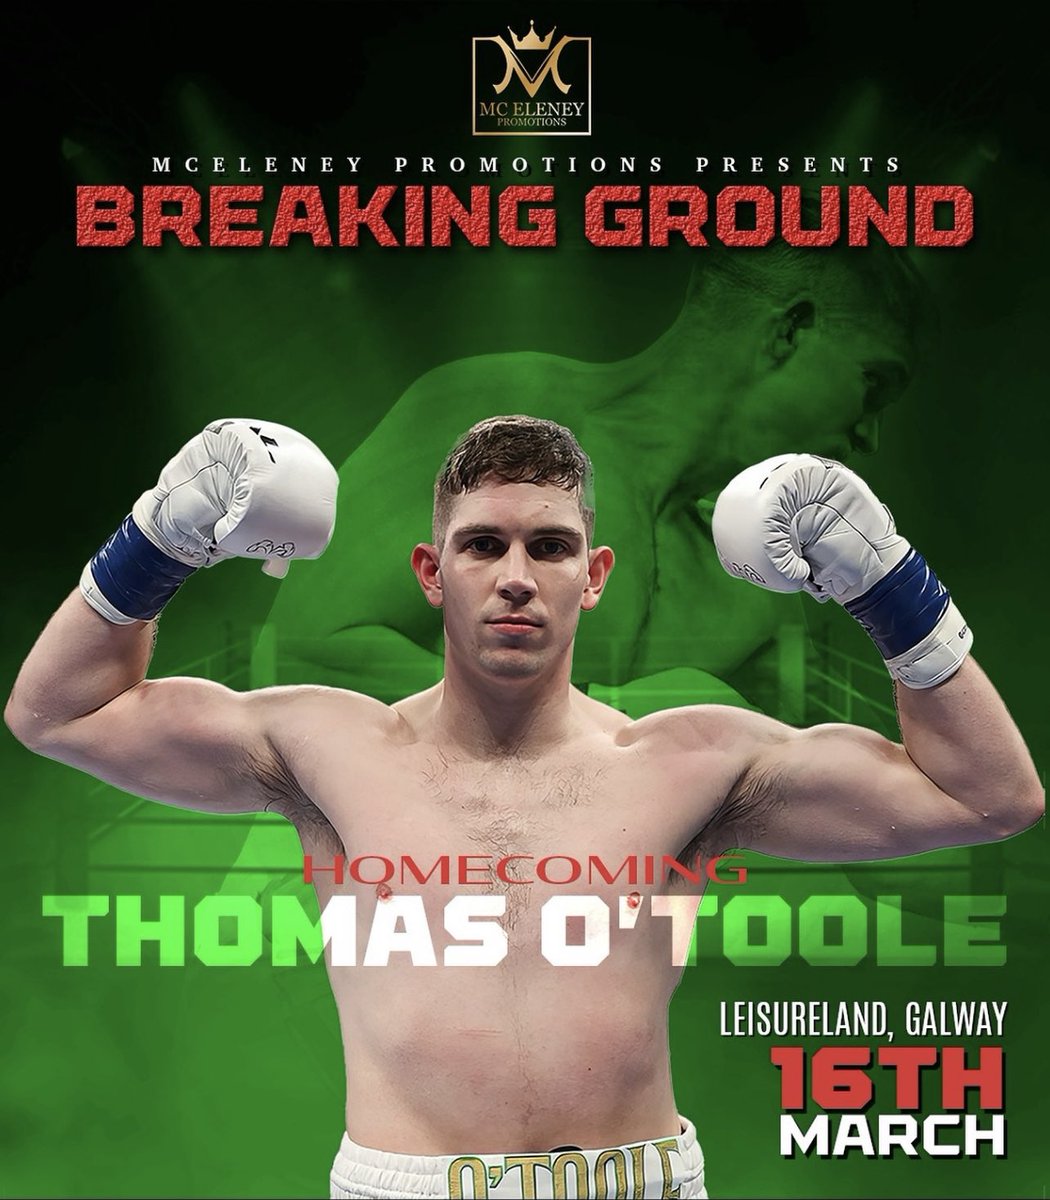 Get ready to cheer on Thomas O’Toole as he steps into the ring for his epic homecoming fight at @leisurelandGal tomorrow night! 🥊 As a proud Galway business, Sound to Light is thrilled to be sponsoring this hometown hero since day one of his professional debut🌟